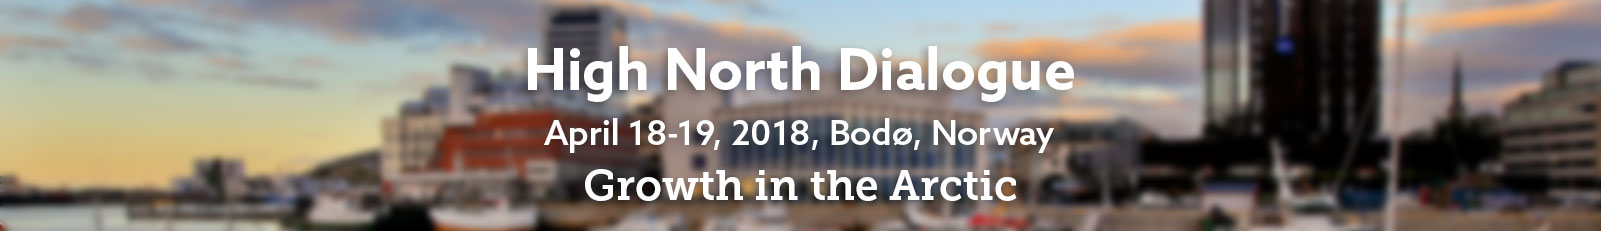 Promotional banner for the High North Dialogue 2018